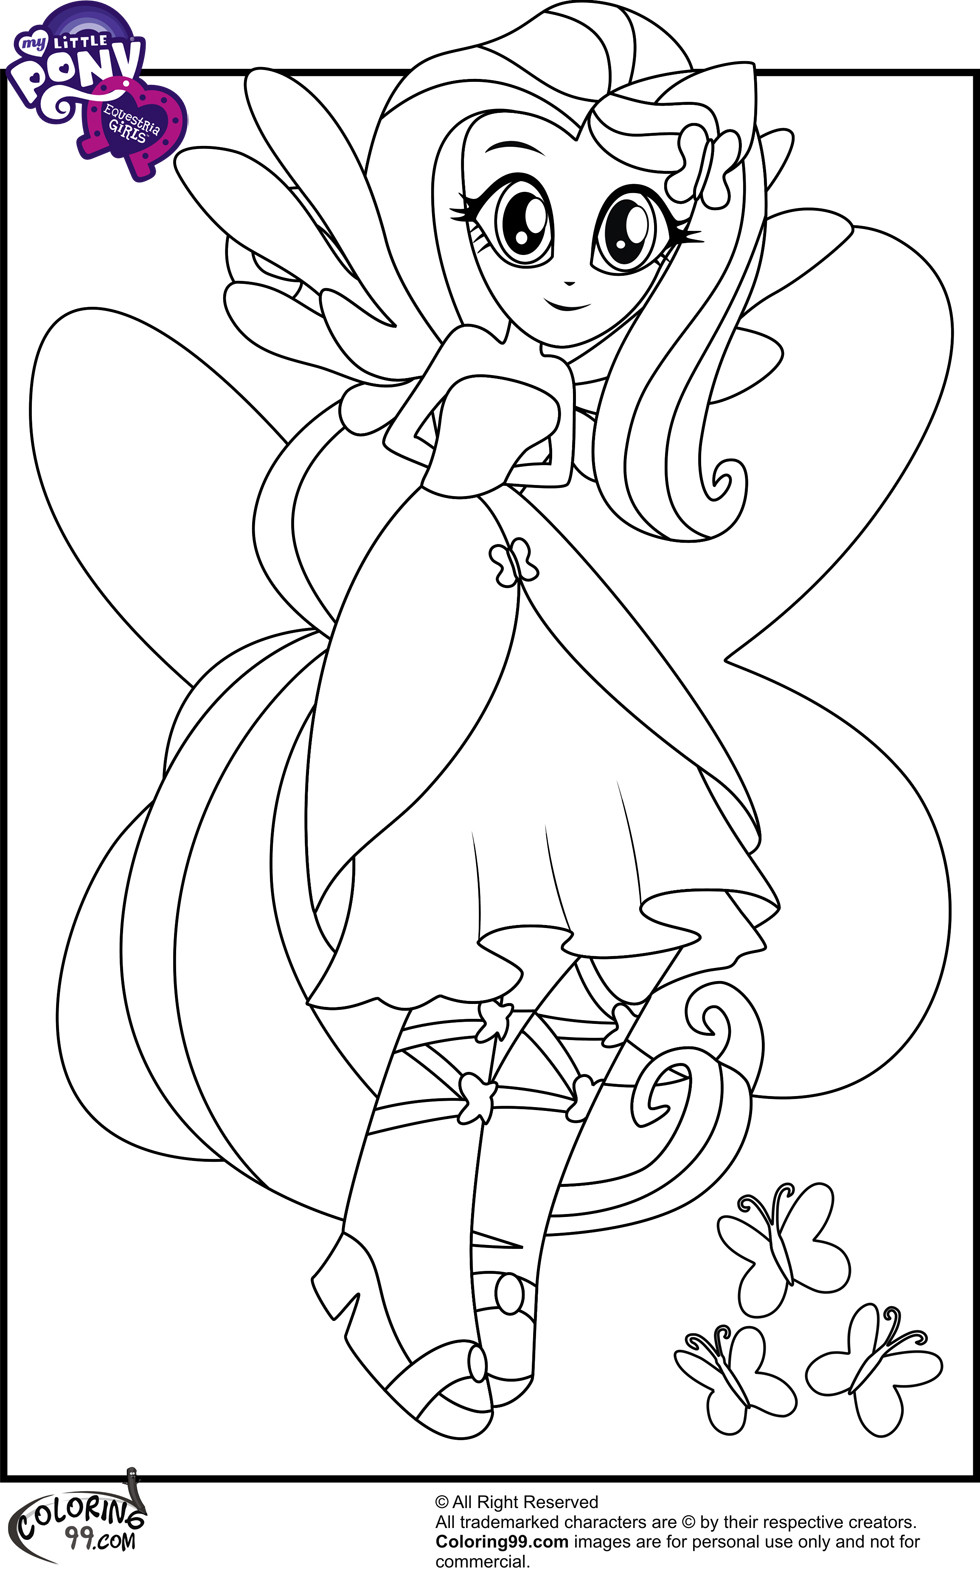 Equestria Girls Sunset Shimmer Coloring Pages
 My Little Pony Equestria Girls Coloring Pages